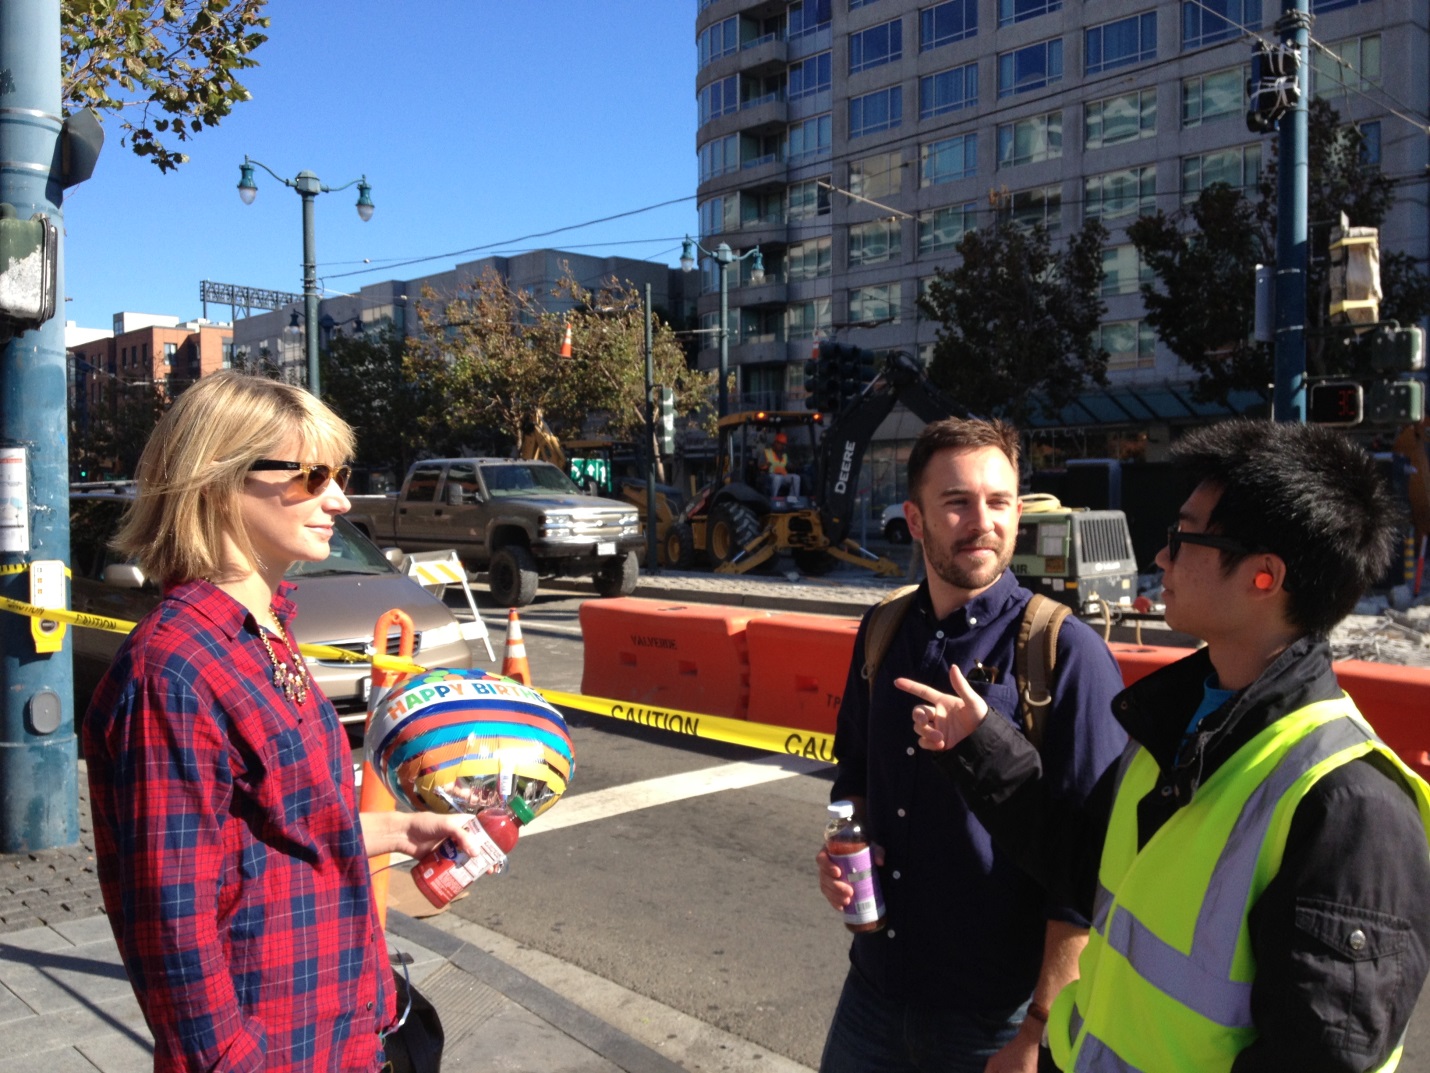 A man and woman stop to get directions and information from one of the project ambassadors in a black jacket and yellow safety vest. King Street and construction equipment are in the background.